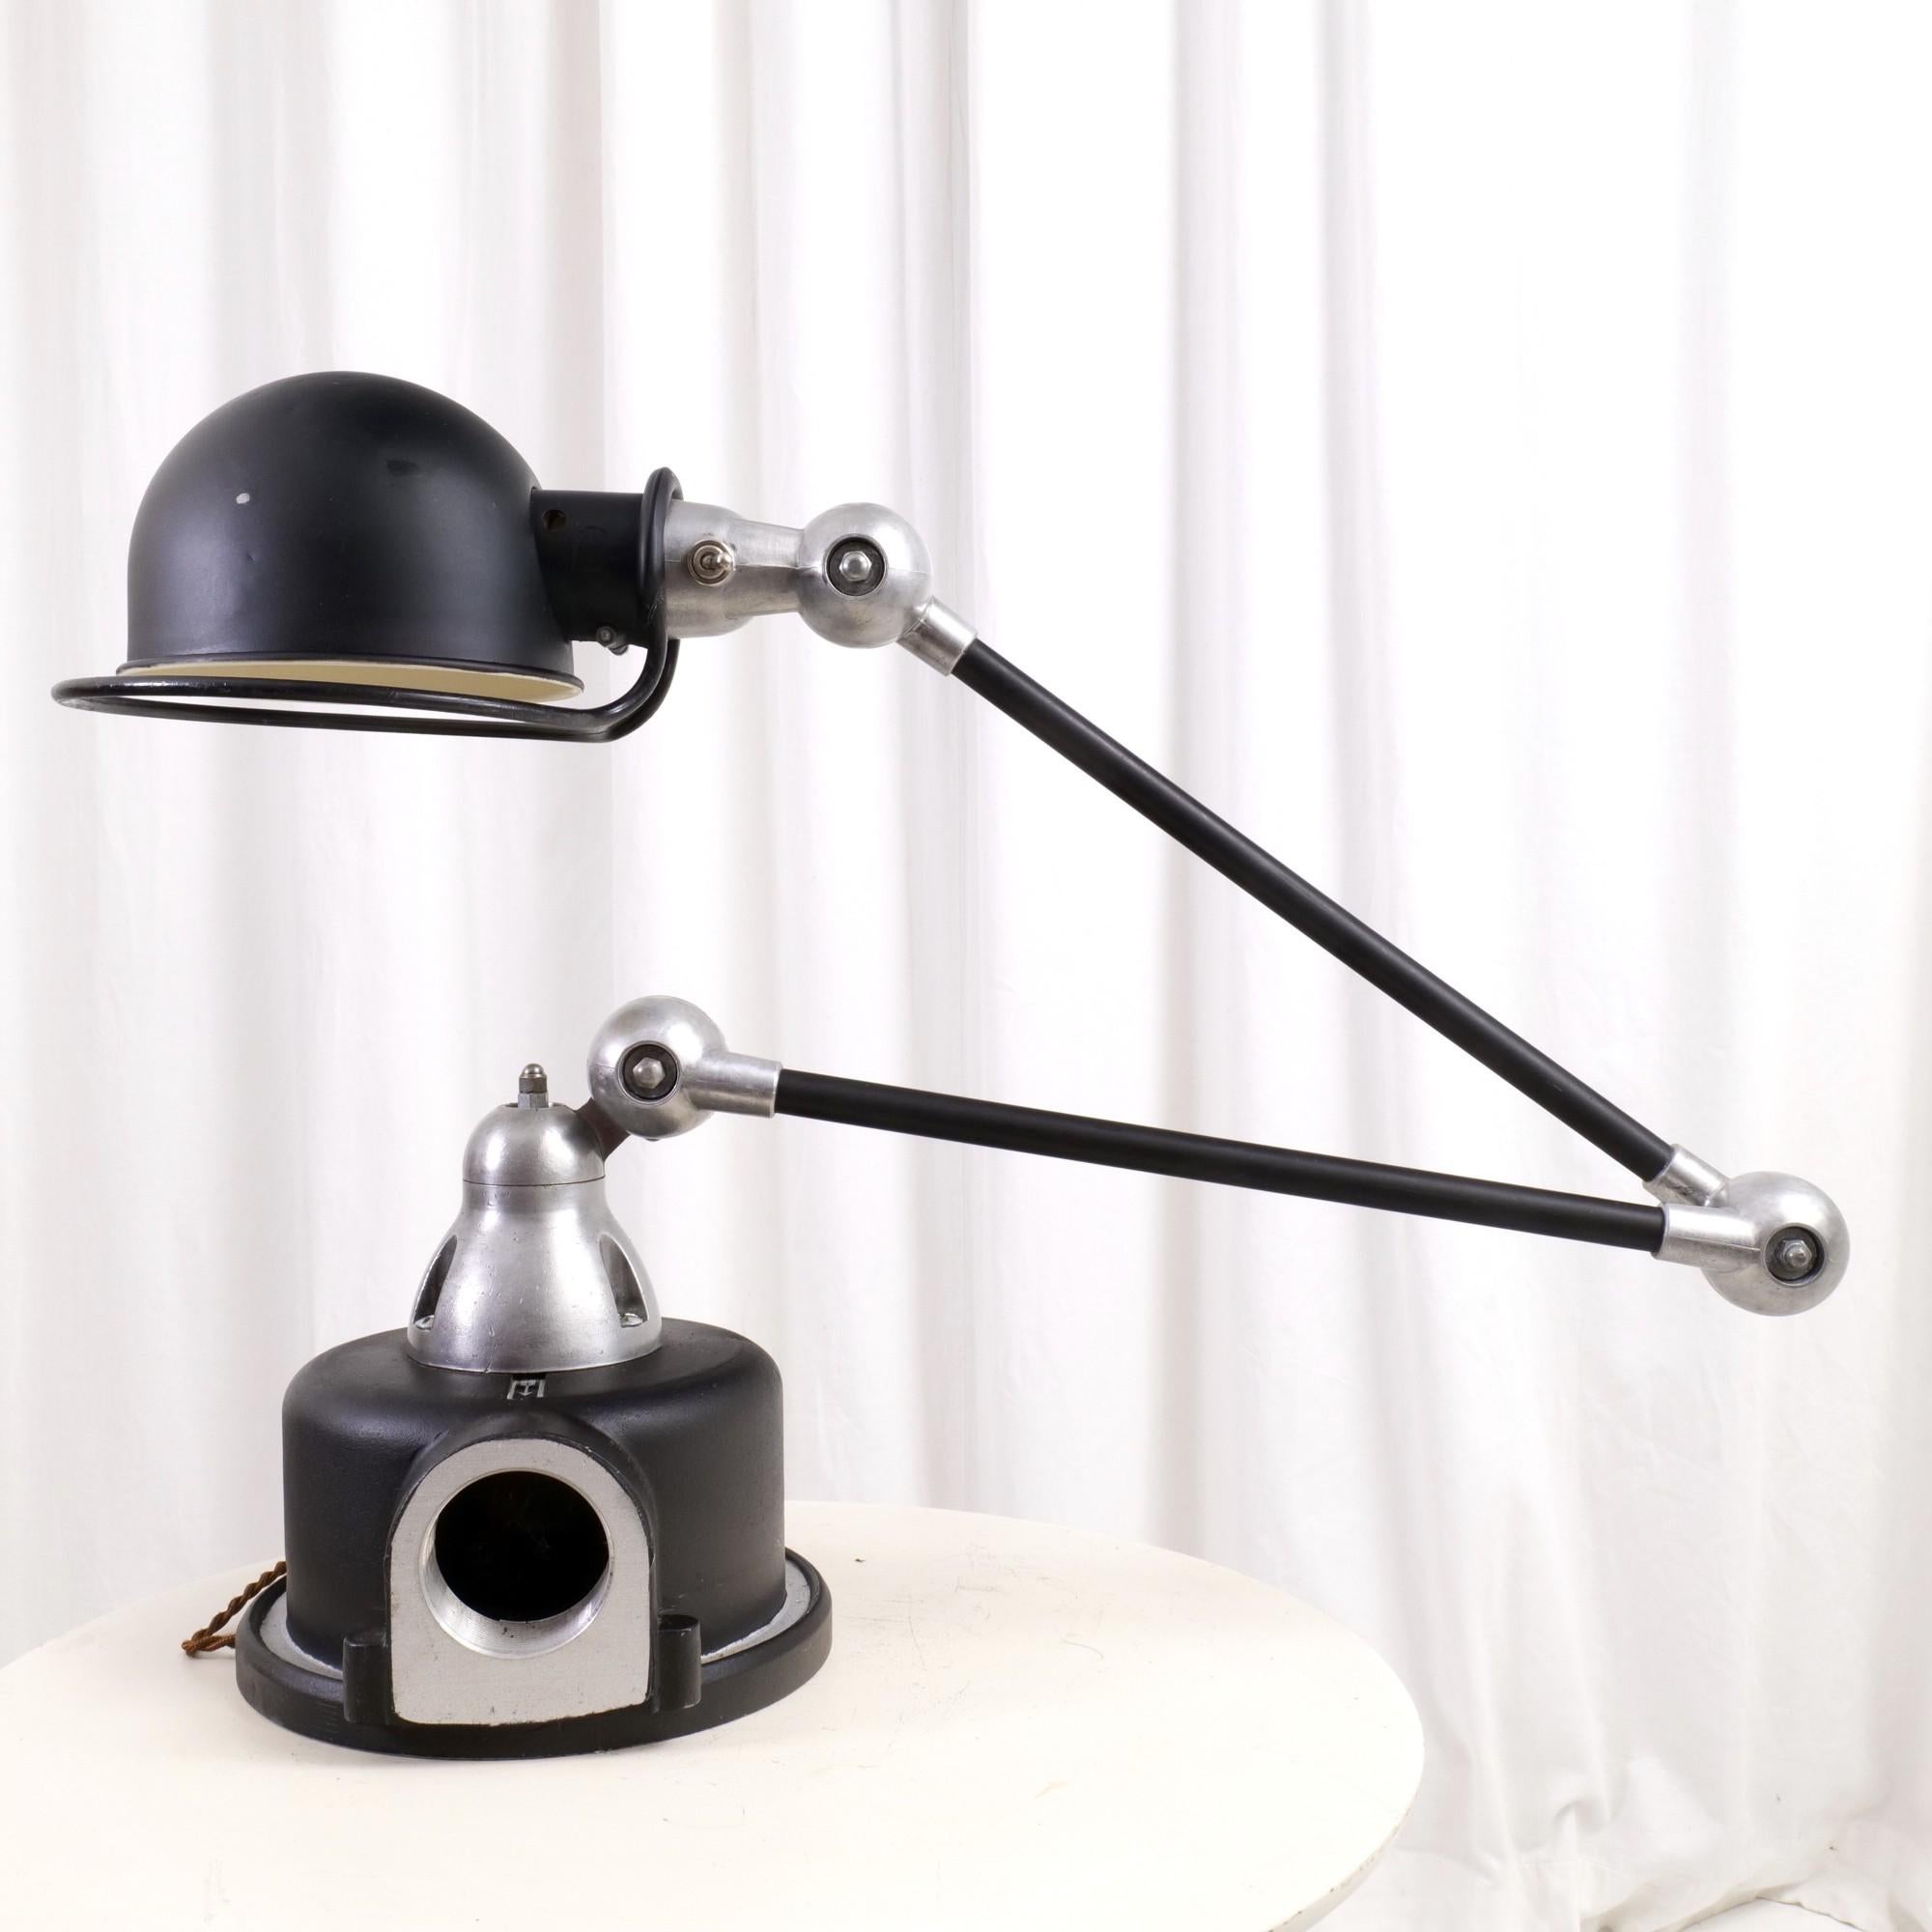 Original Jielde lamp from France with slight signs of use due to age.
French industrial lamp with two rods and three joints and nostalgic metal toggle switch. 

Original 1970's Jielde - Made in France.

Dimensions:
105 cm height
15 cm width.